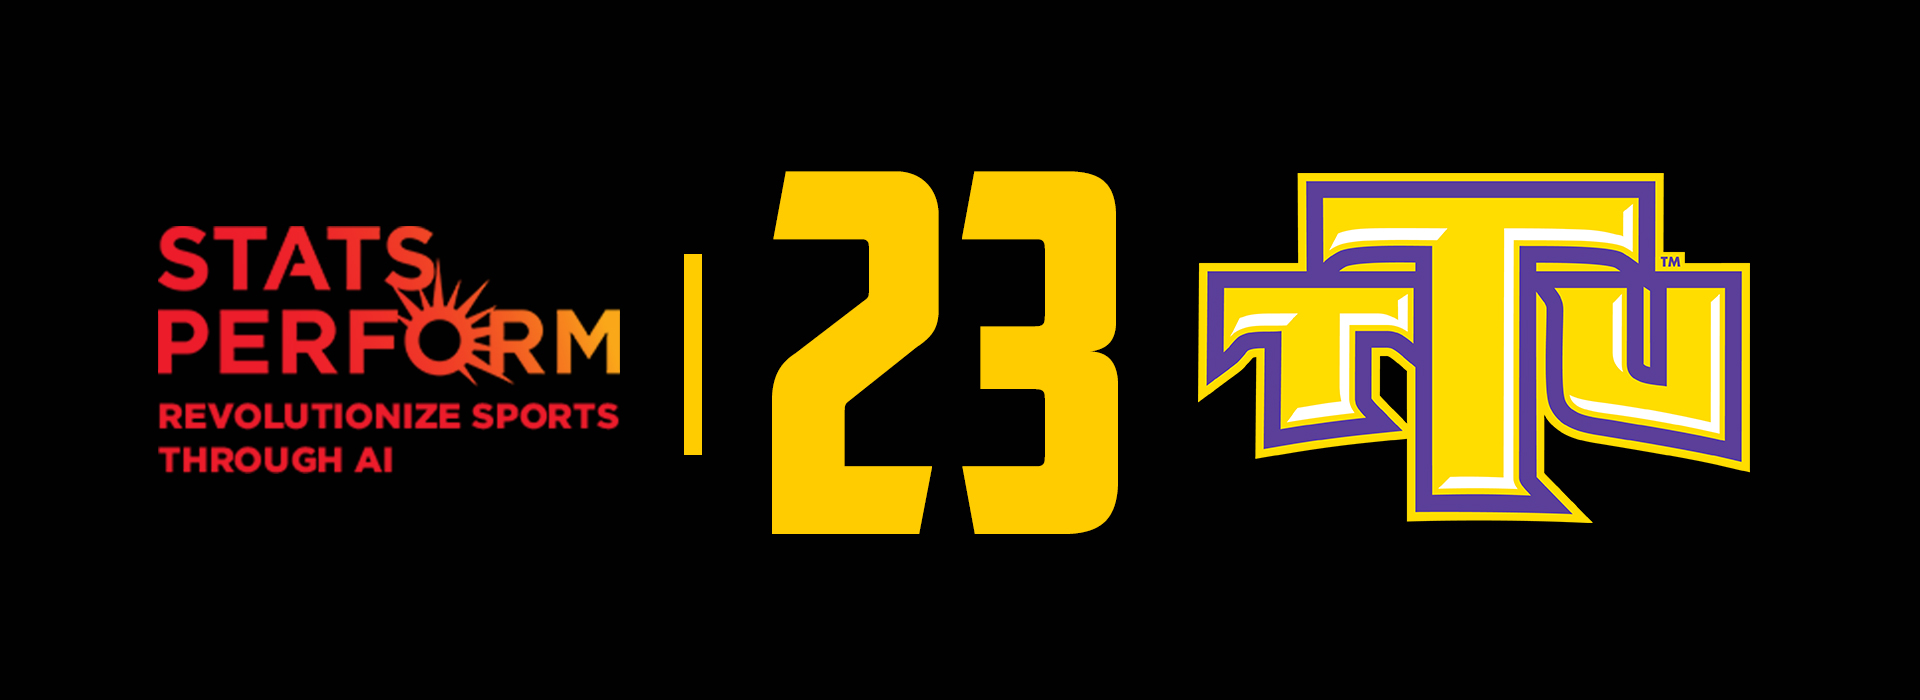 Golden Eagle football earns No. 23-ranking in Stats Perform FCS Top 25